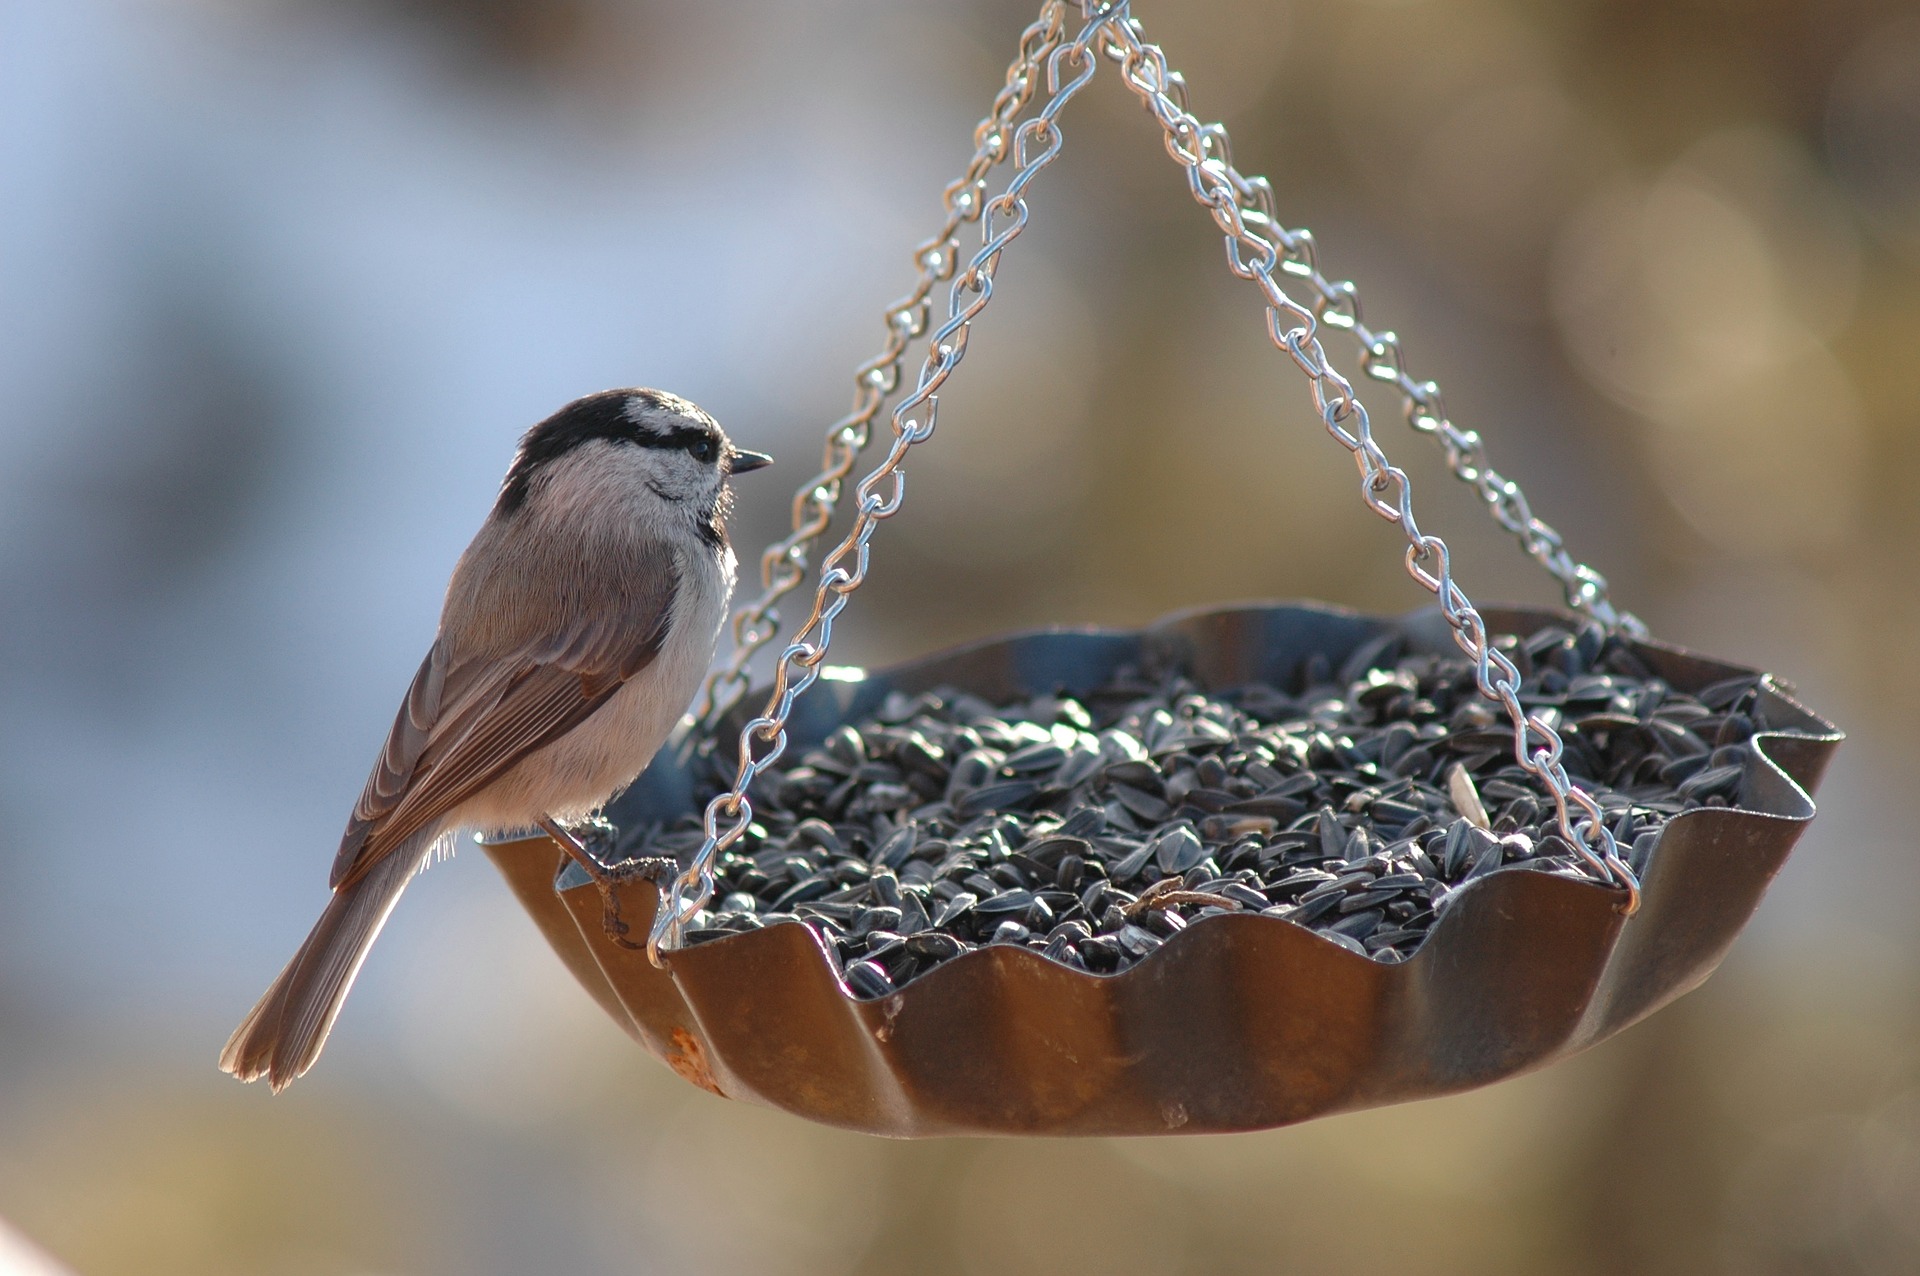 A Guide To Making a Bird Feeder